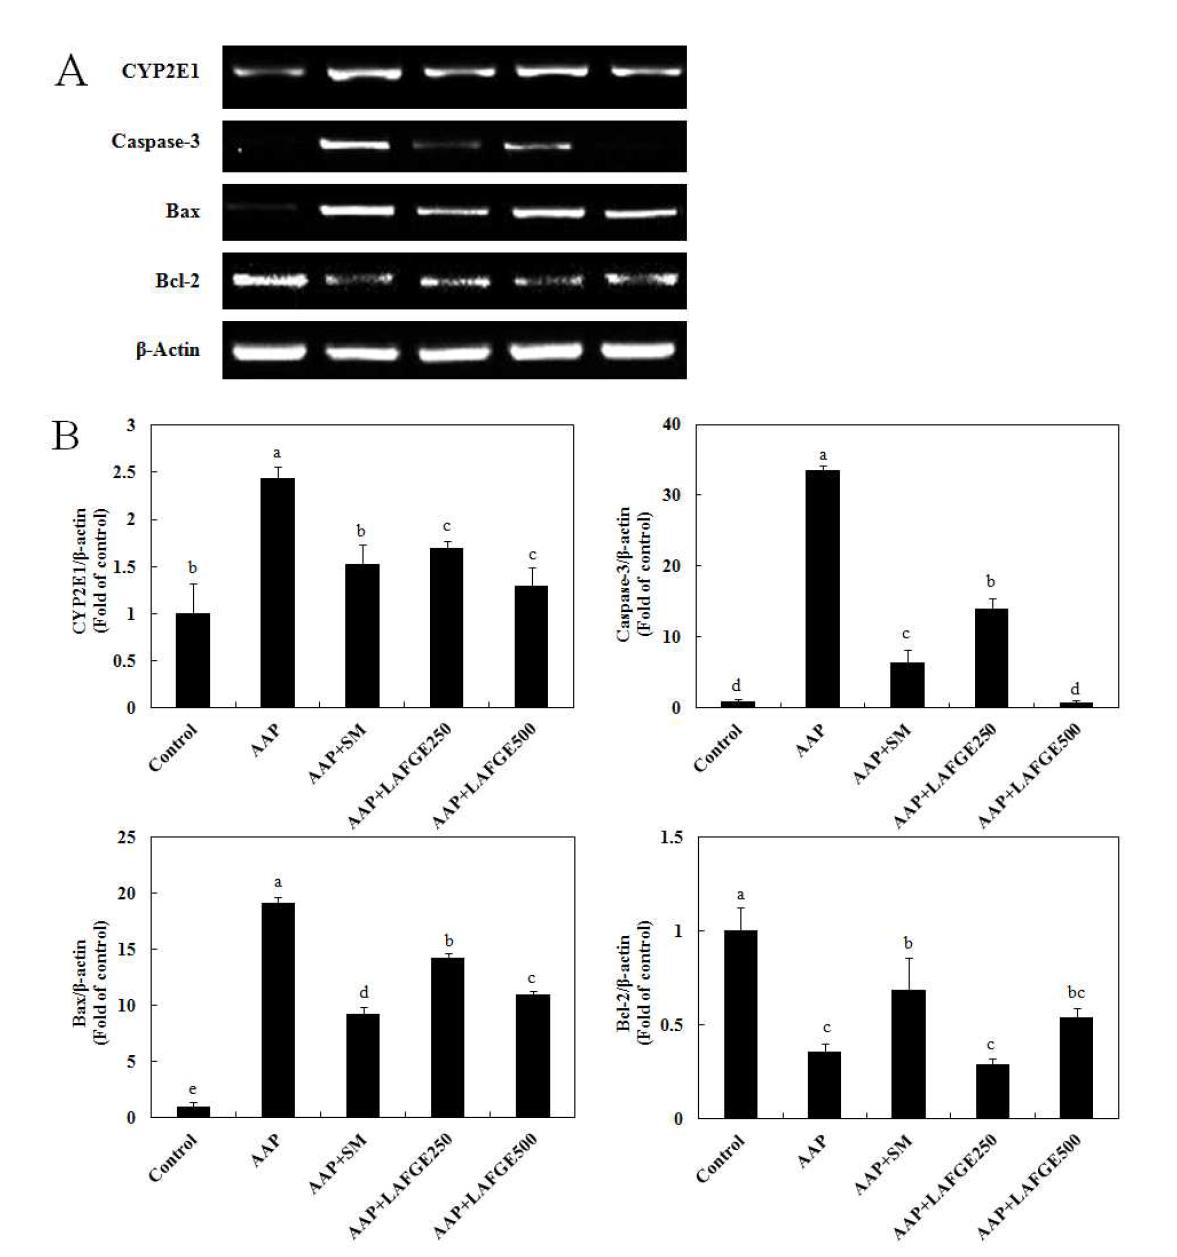 Effects of LAFGE on mRNA expression of CYP2E1, caspase-3, Bax, and Bcl-2 in acetaminophen-intoxicated rat liver.